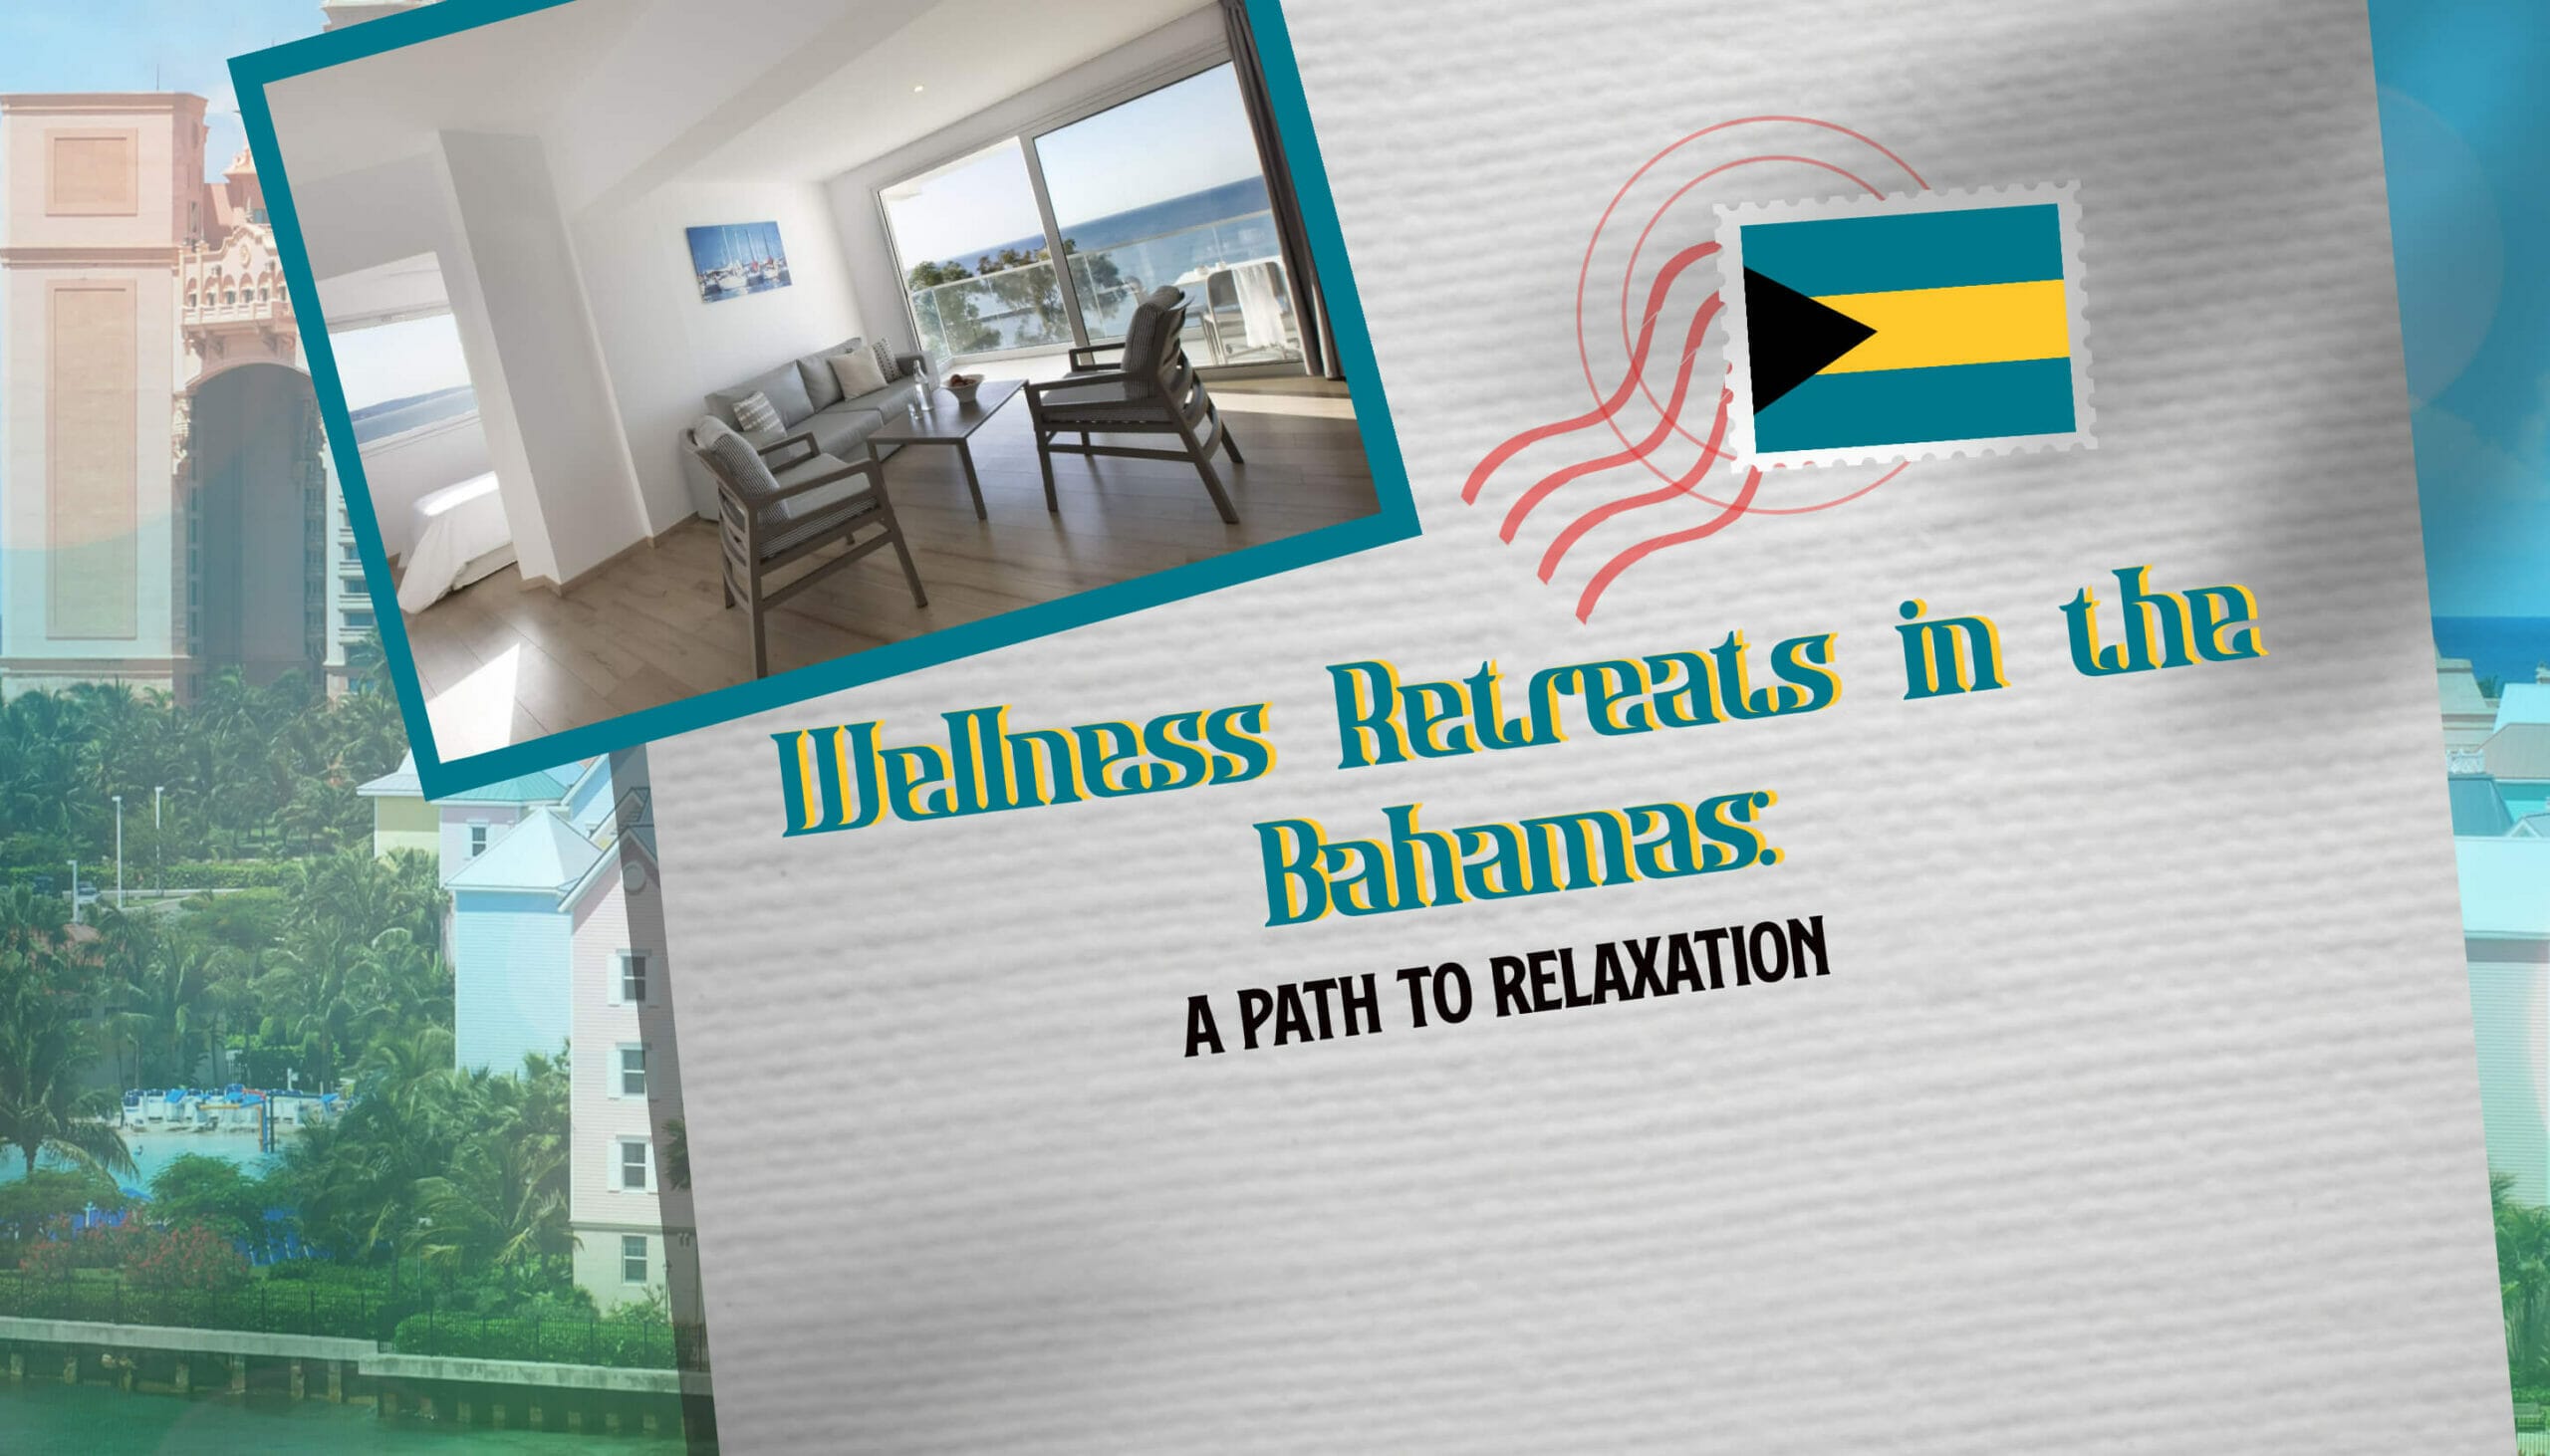 Wellness Retreats in the Bahamas A Path to Relaxation